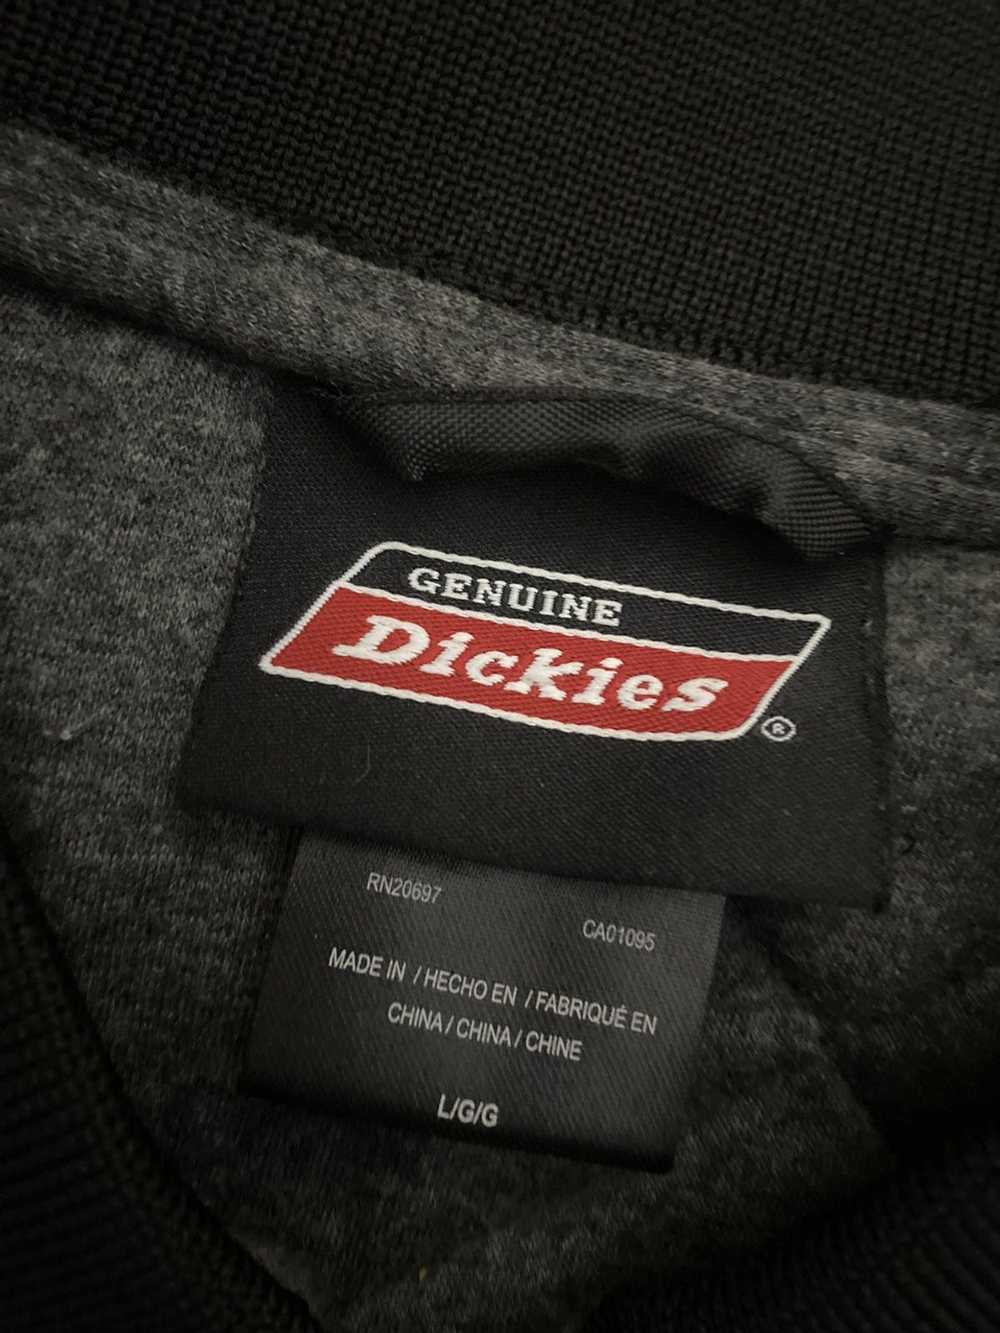 Dickies Dickies Insulated Quilted Workwear Jacket - image 4